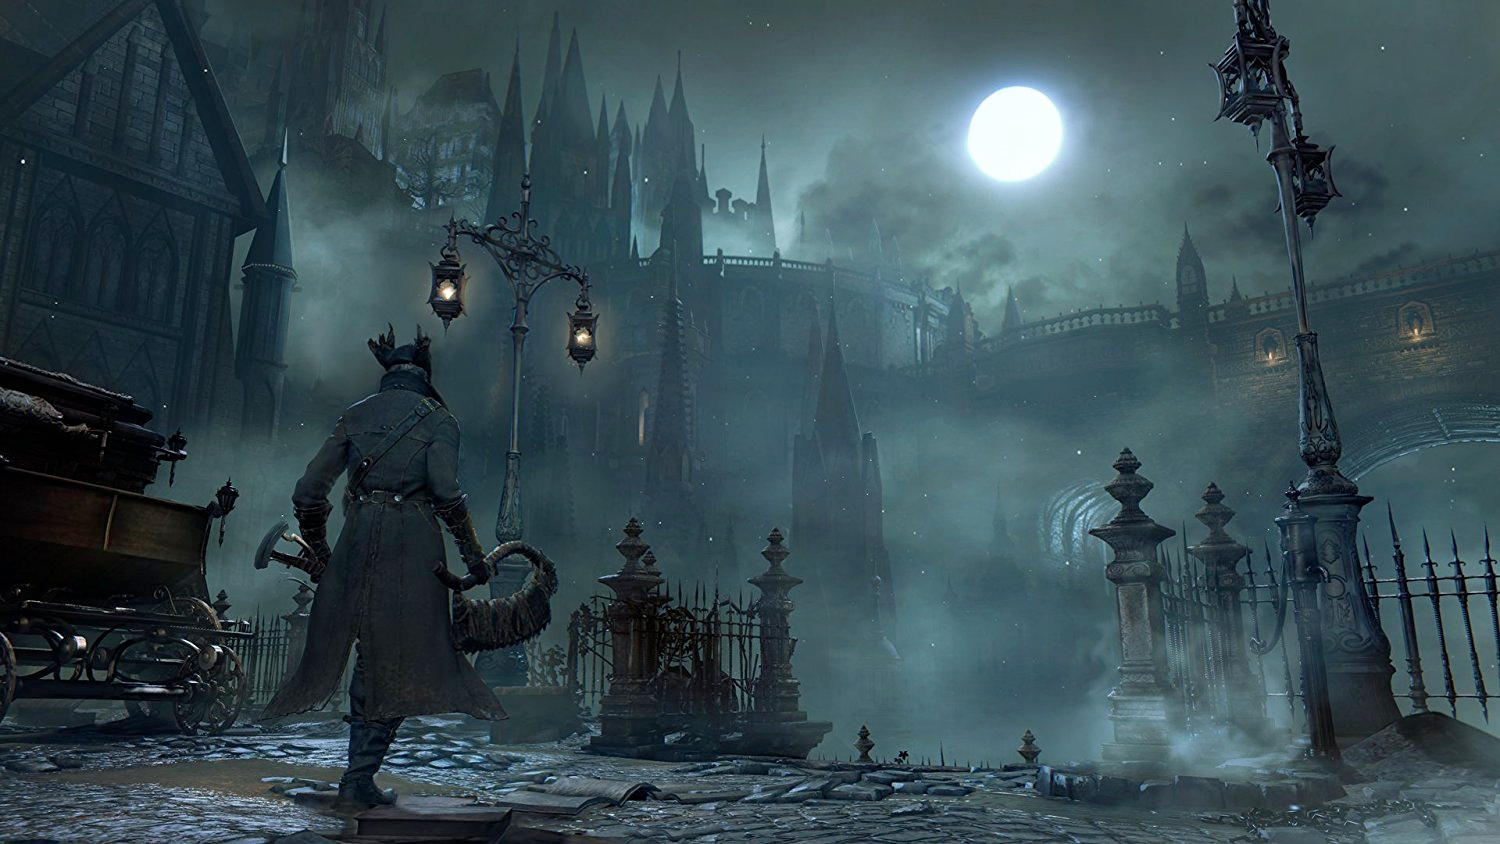 Renowned Bloodborne community member Meph has organized the Return to Yharnam event. Image credit: FromSoftware